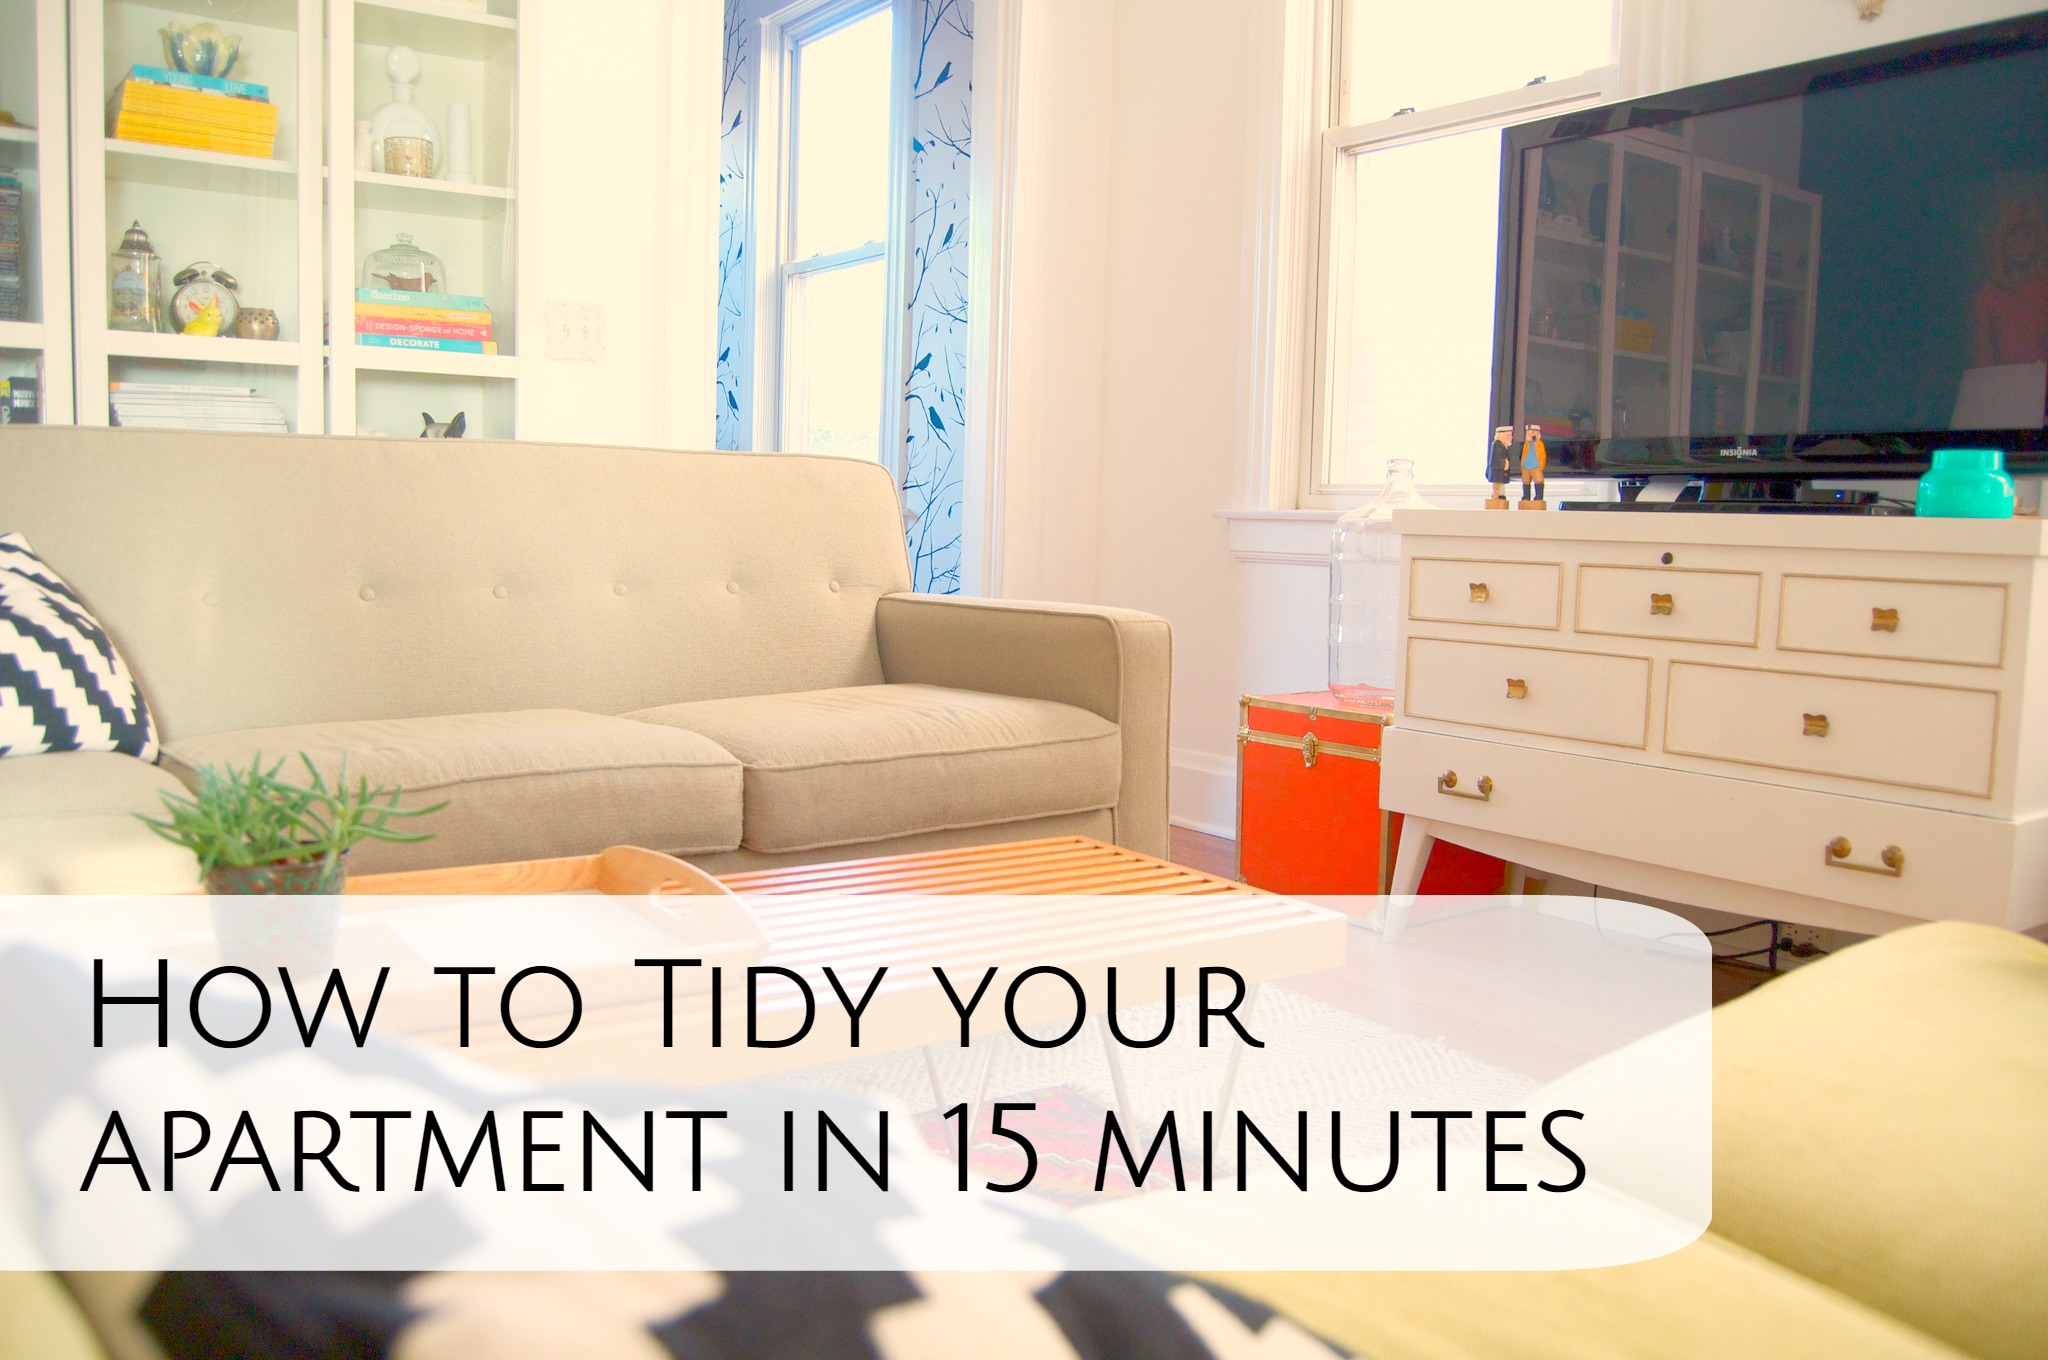 How to tidy your apartment in 15 minutes